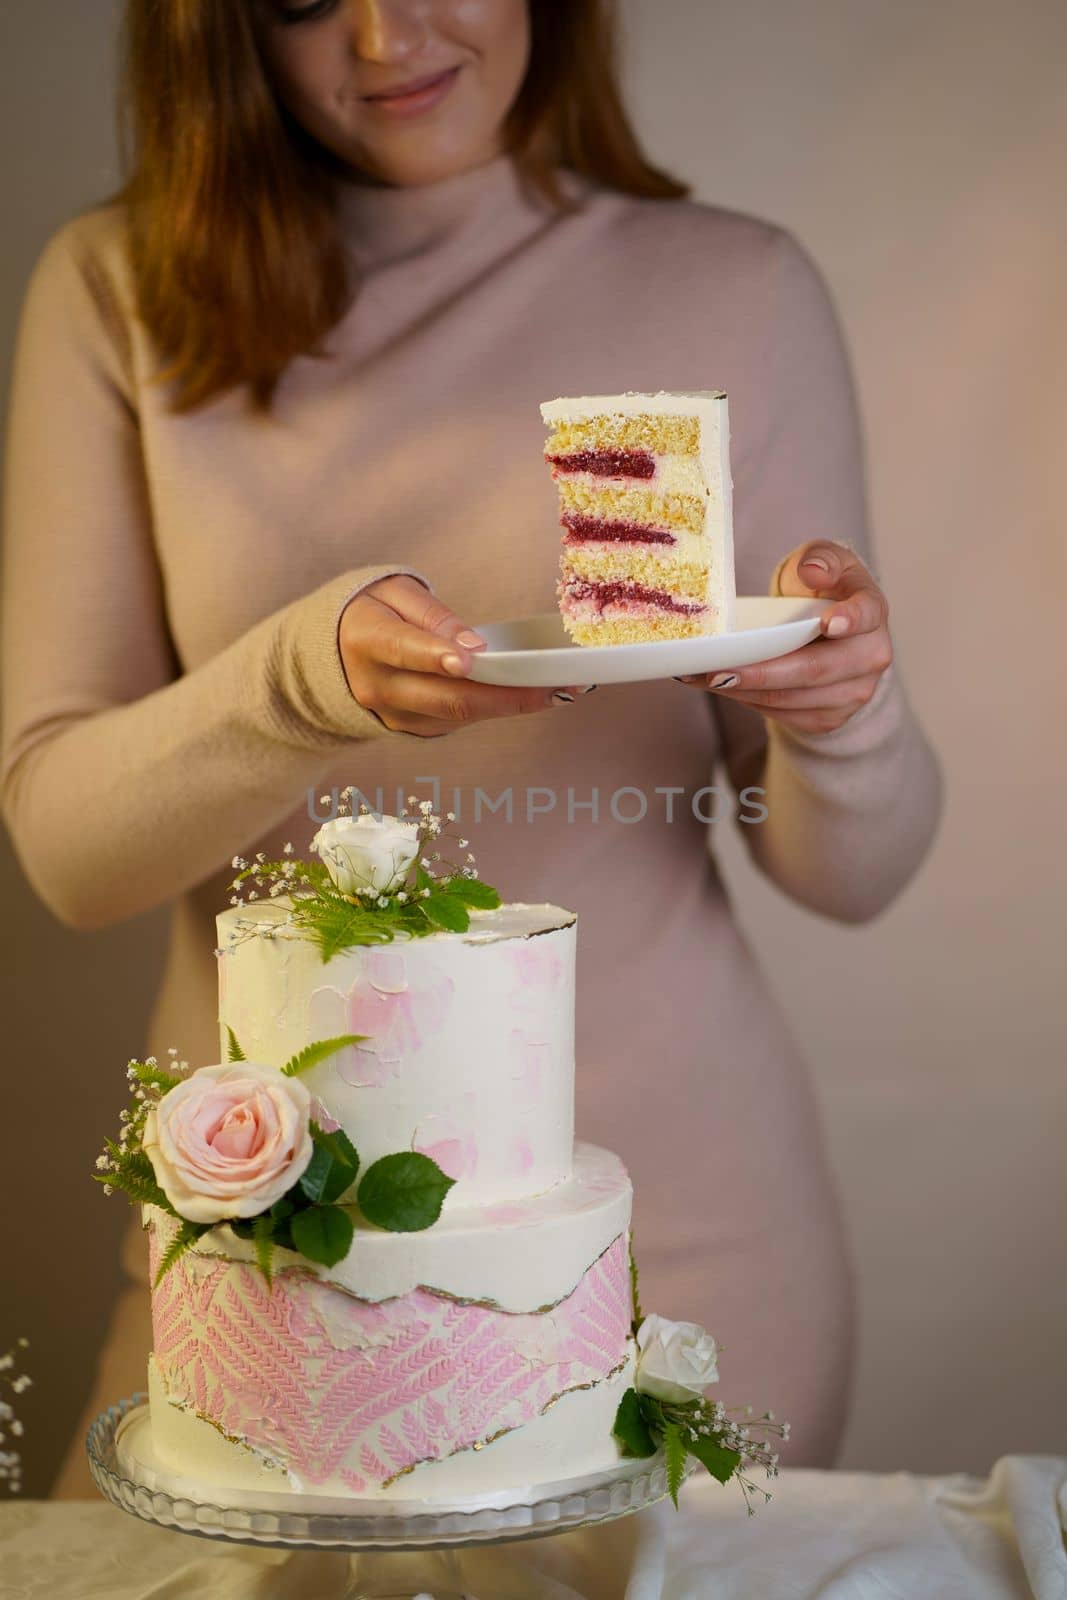 Girl cuts and serves a piece of cake. festive wedding two-tiered cake decorated with fresh flowers on a gray background by aprilphoto